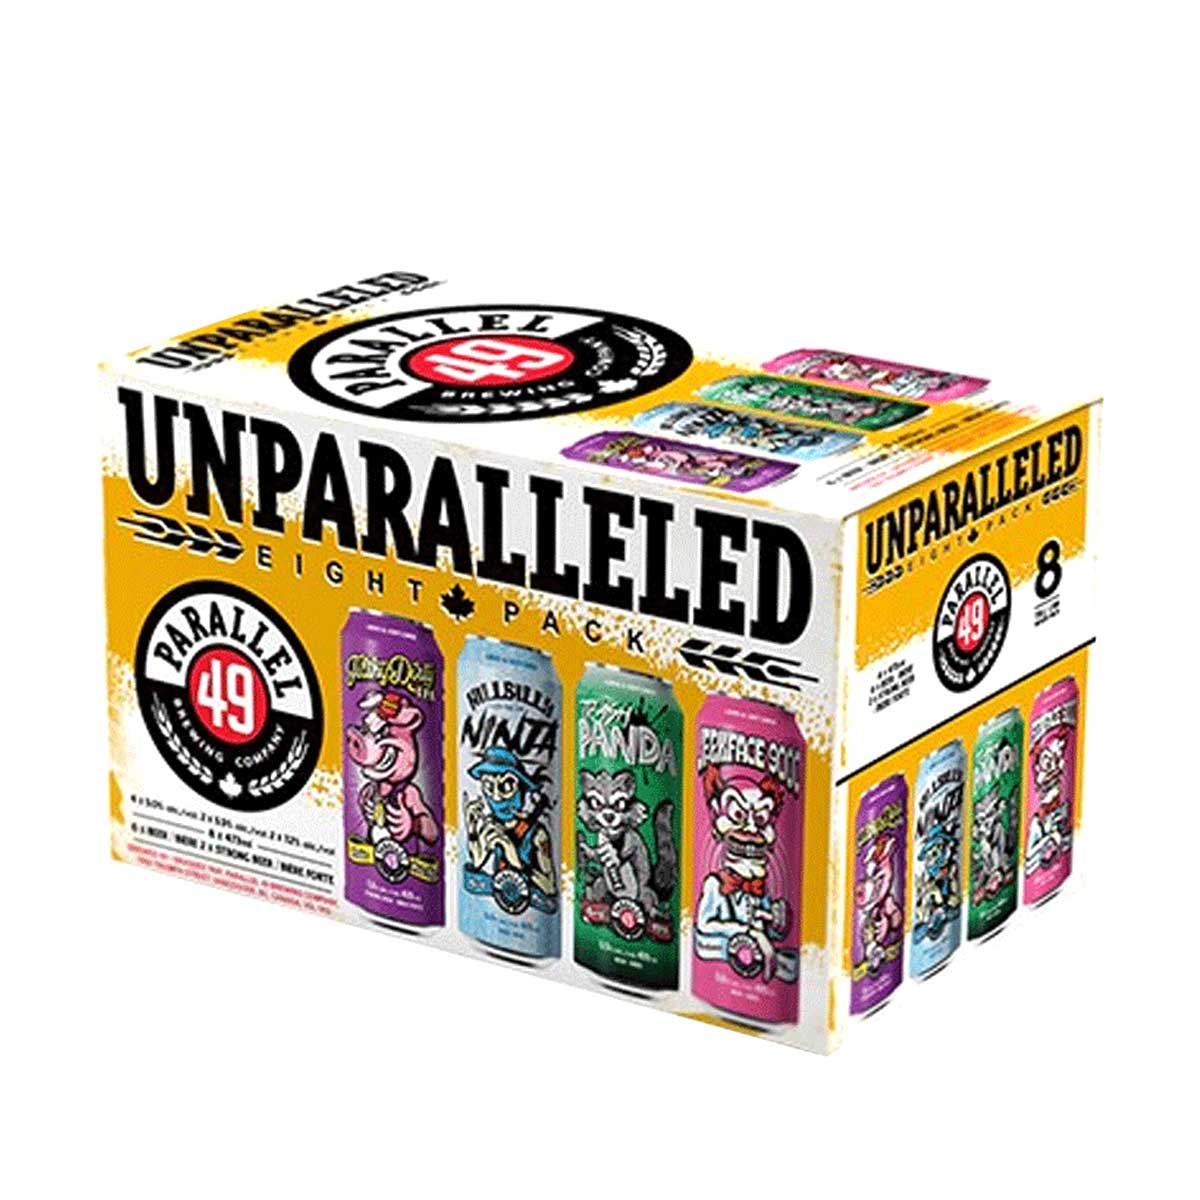 TAG Liquor Stores BC-PARALLEL 49 UNPARALLED 8 CANS